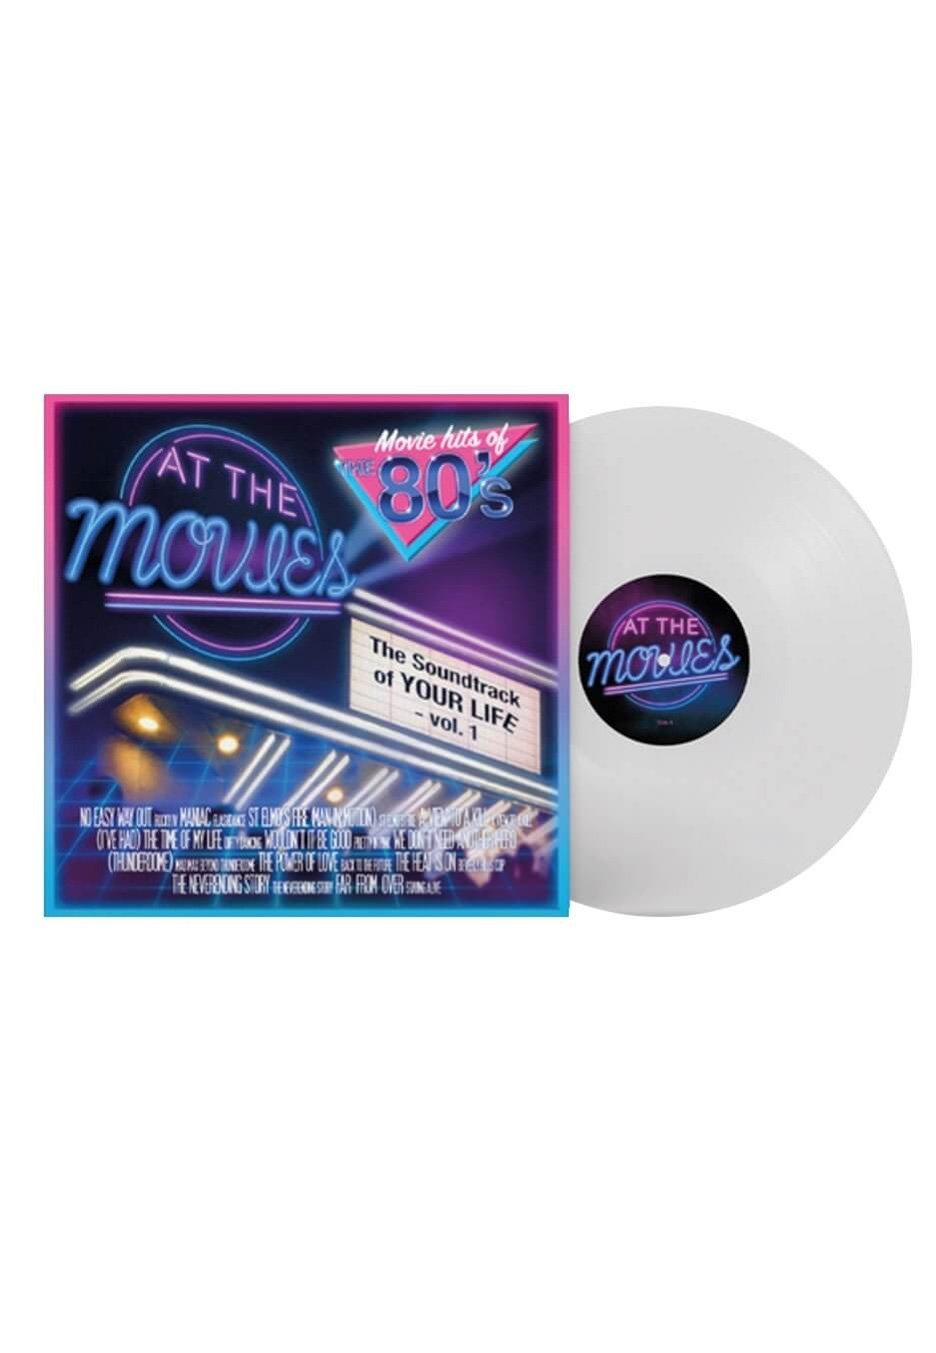 At The Movies - Soundtrack Of Your Life Vol. 1 Clear - Colored Vinyl